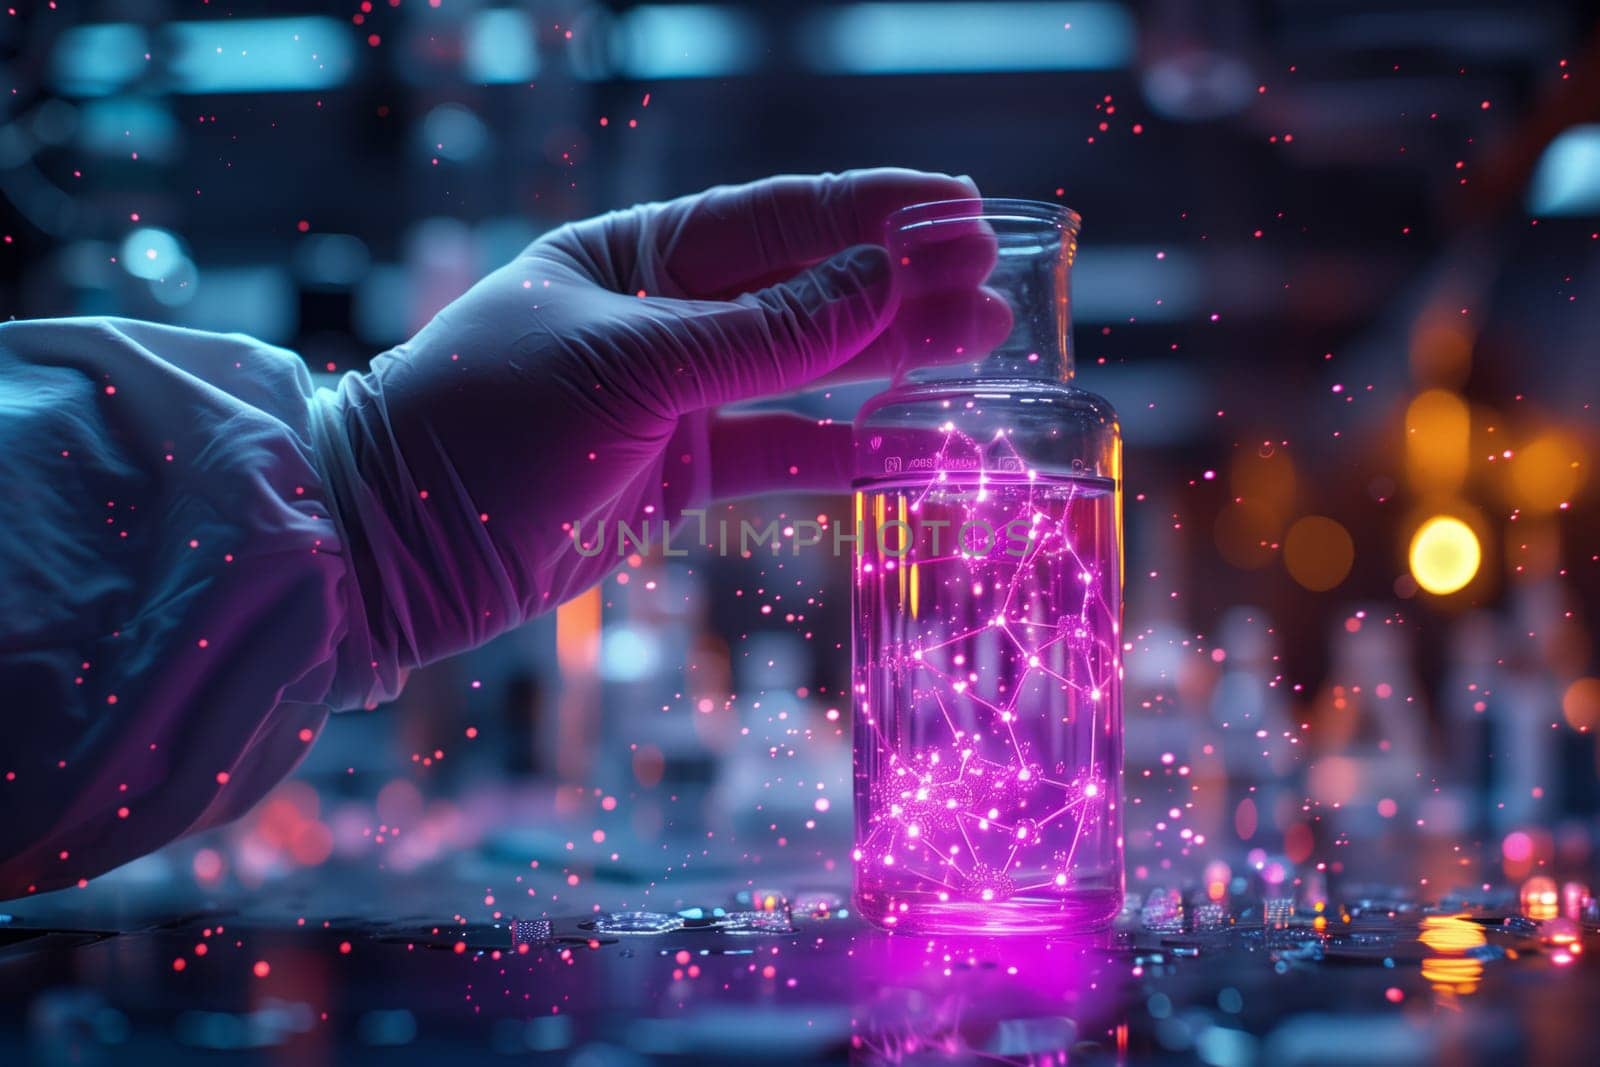 Scientist adds purple liquid to beaker for visual effect lighting at fun event by richwolf